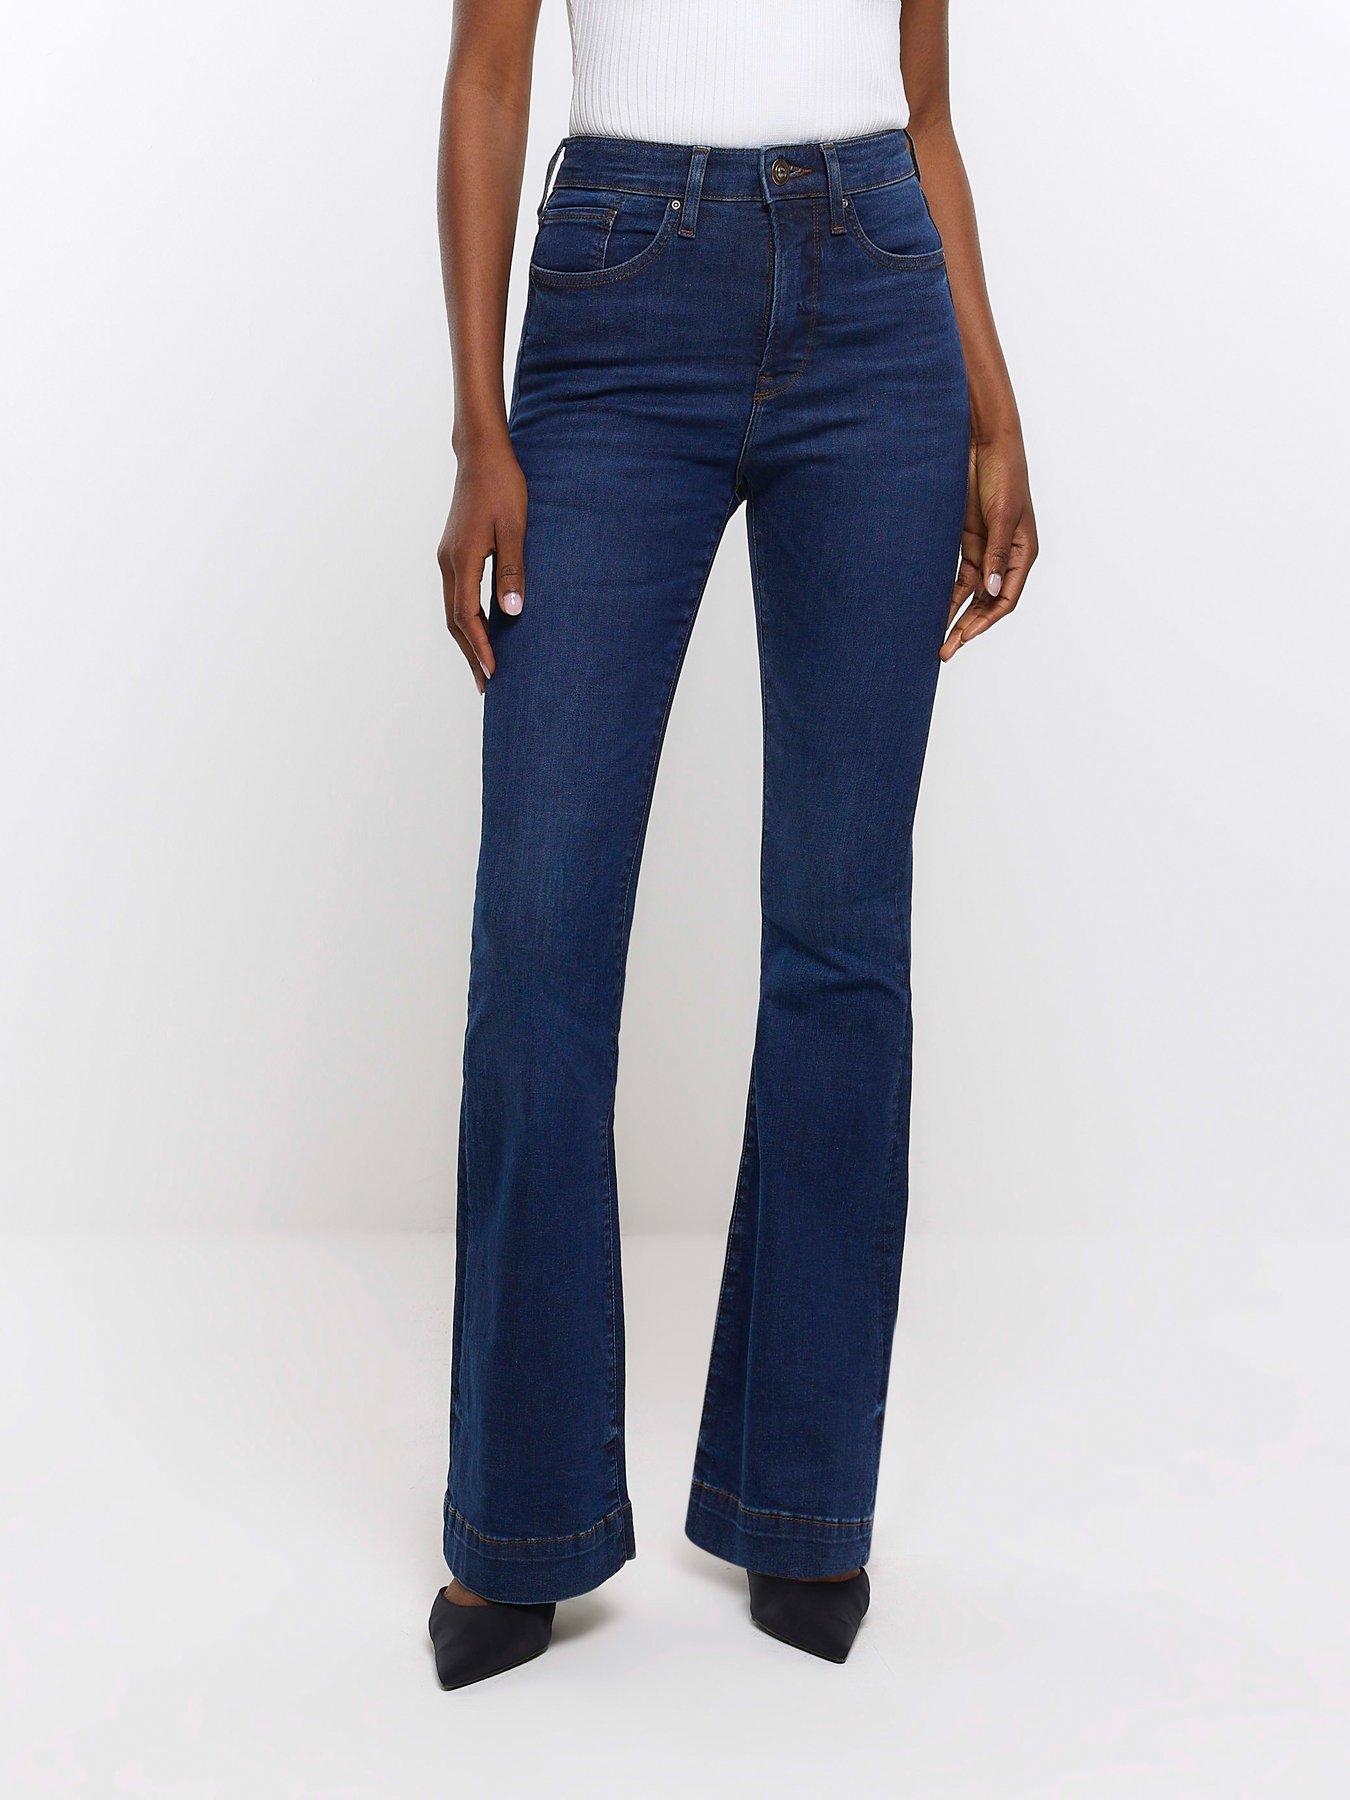 Women's - Organic Cotton Studios High Rise Flare Jeans in Washed Indigo